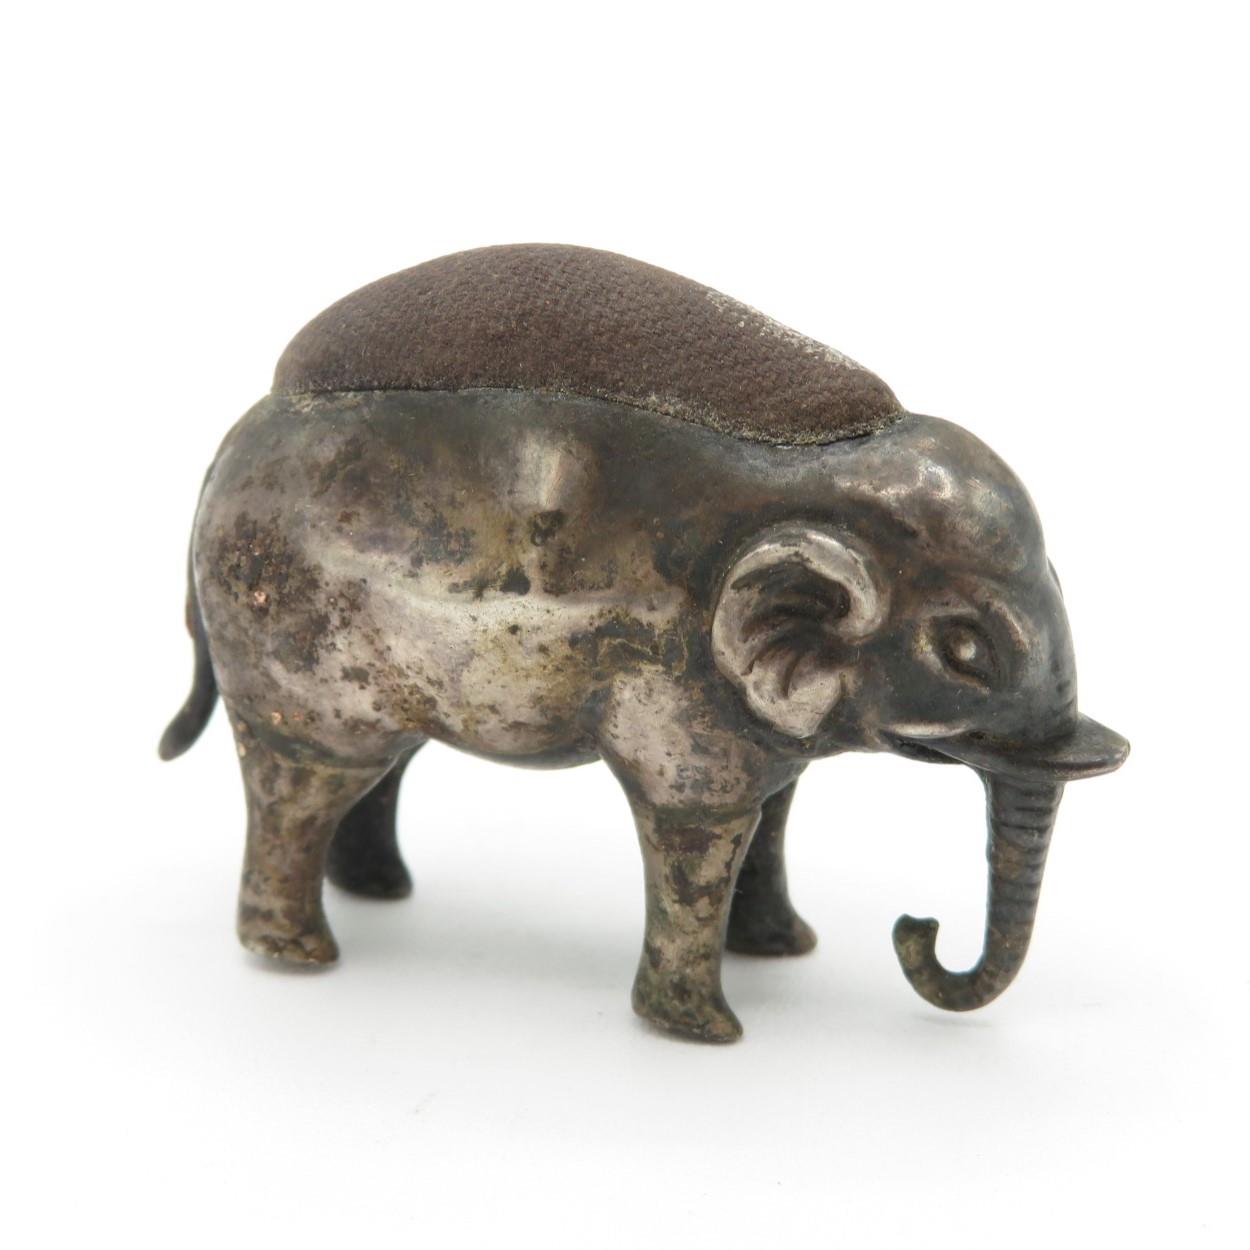 Antique Edwardian .925 Sterling Silver Novelty Elephant Pin Cushion (15g) - Maker - Unidentifiable - Image 2 of 5